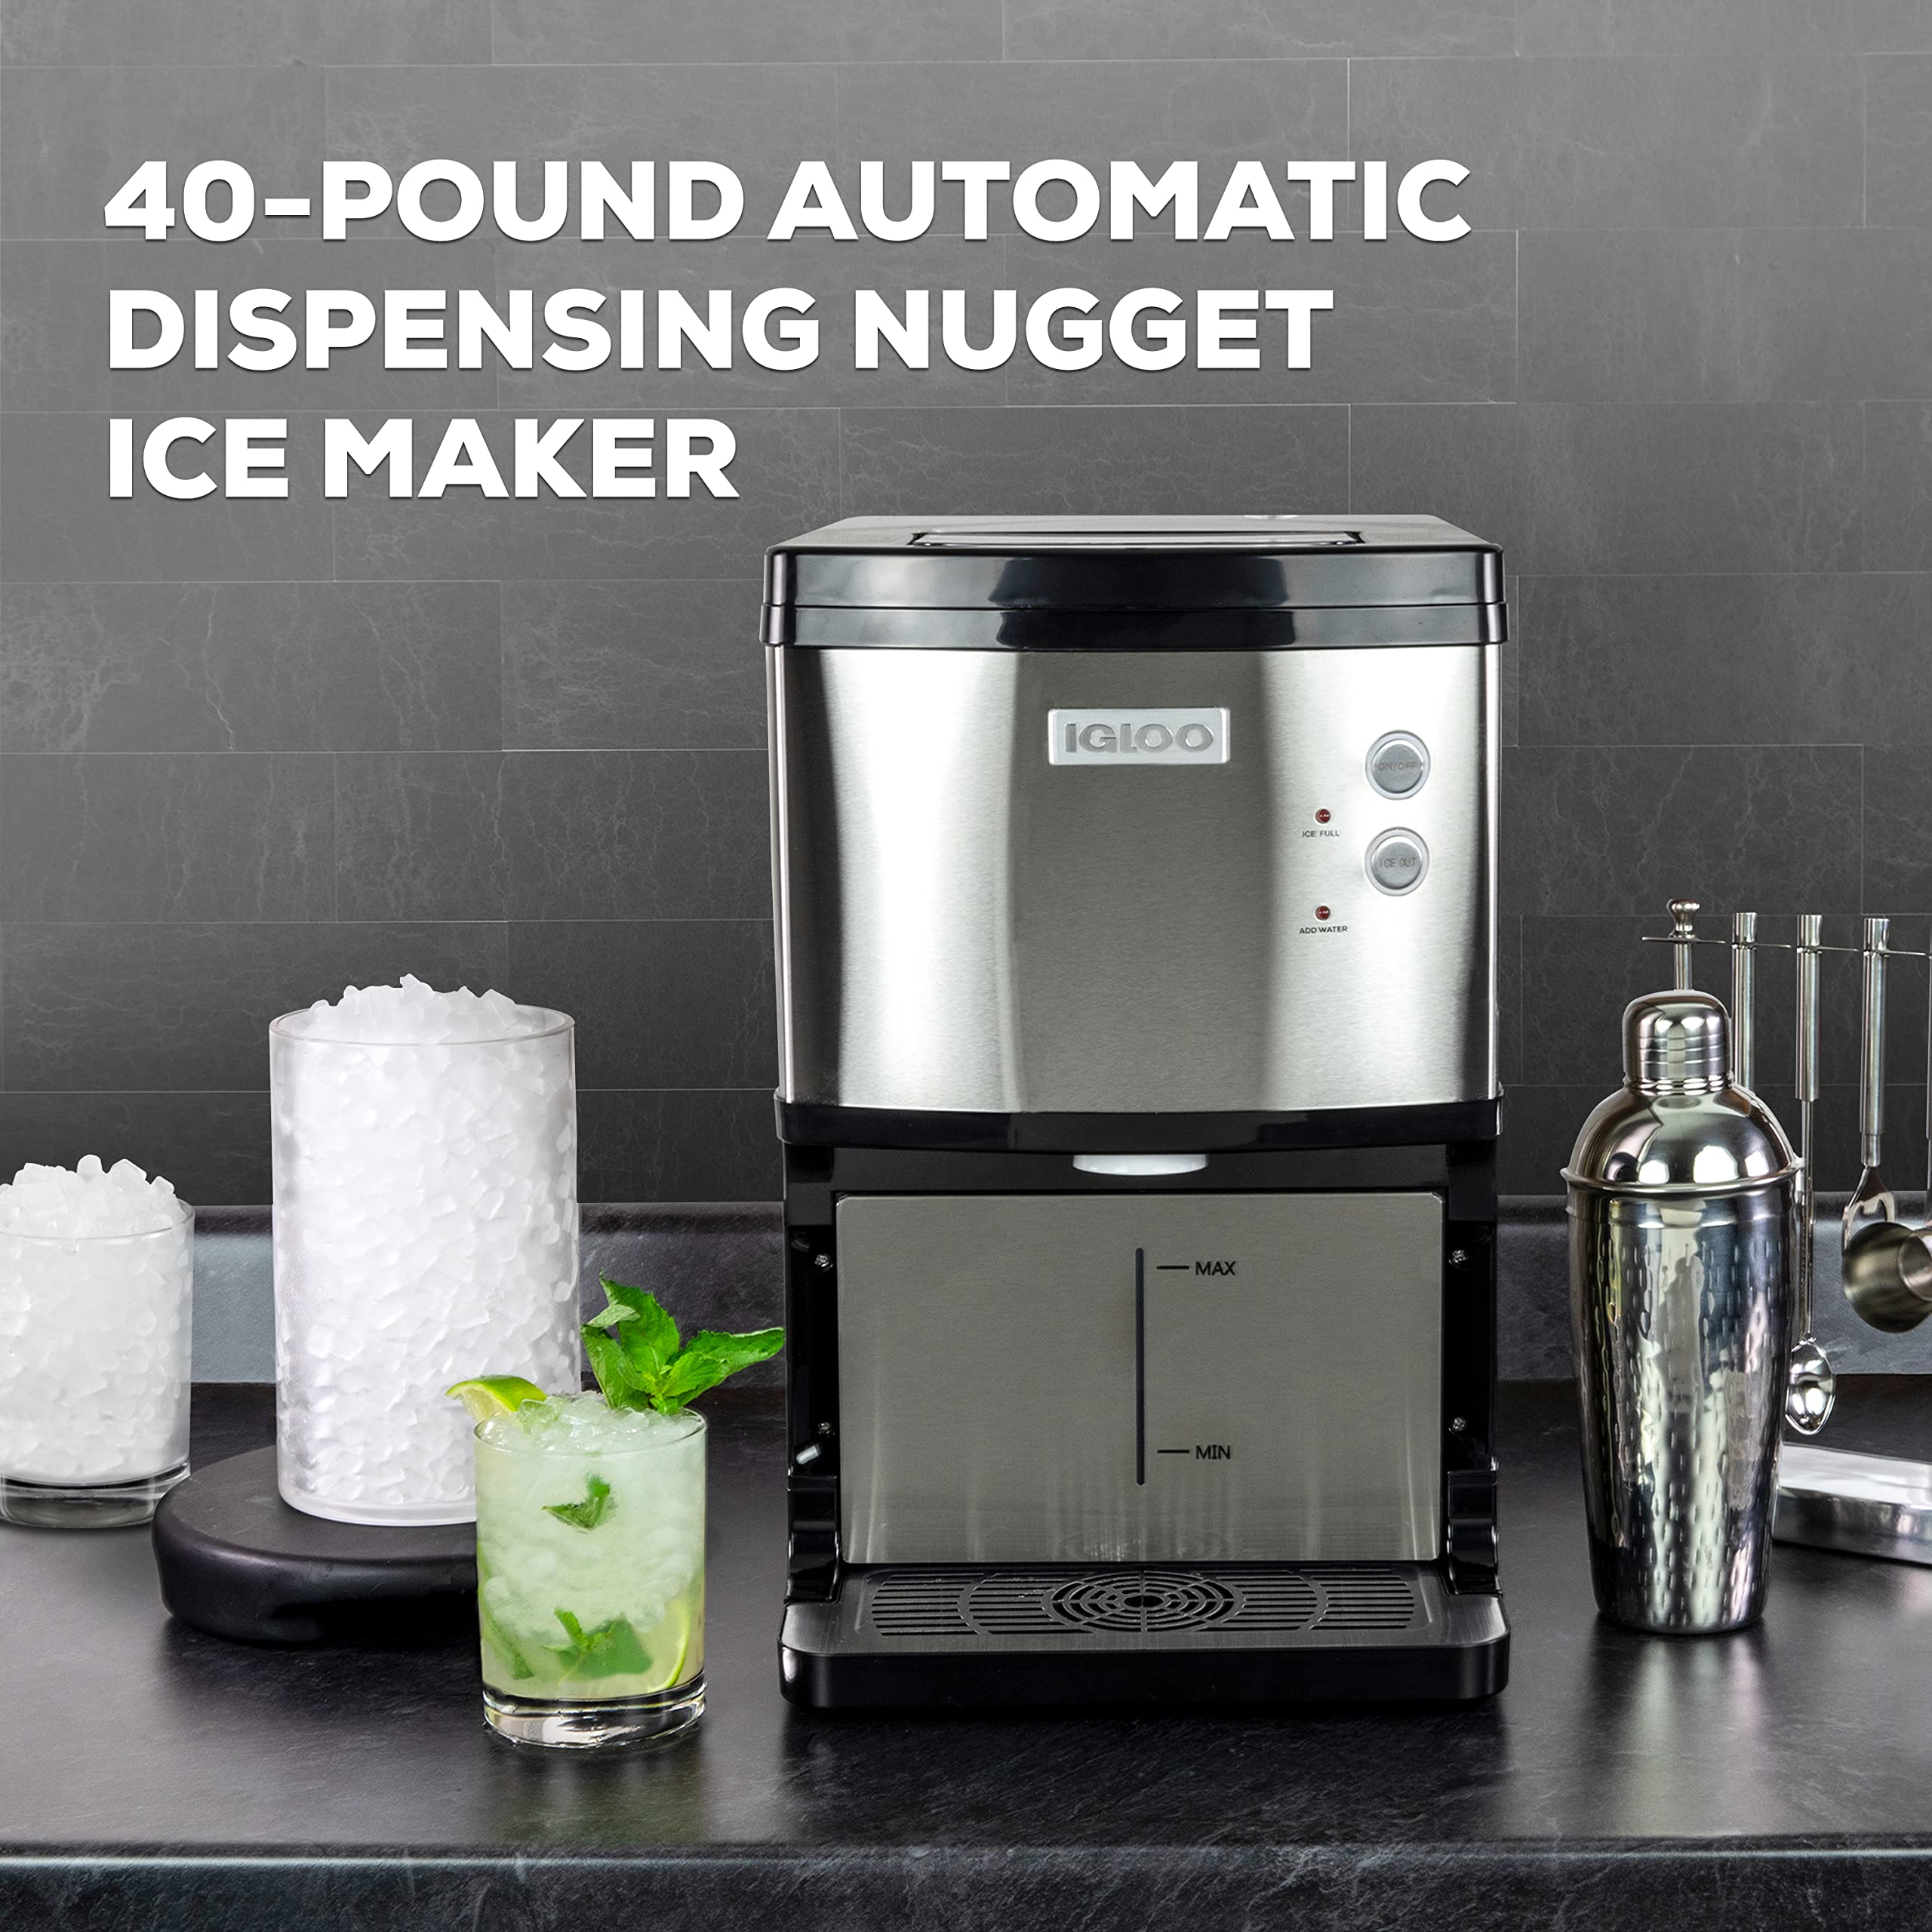 Igloo 40 LB Automatic Dispensing Nugget Ice Maker, Portable, Countertop, Stainless Steel, for Home Use, Makes Small Chewable Cubes for Cold Water, Soda, and Other Beverages